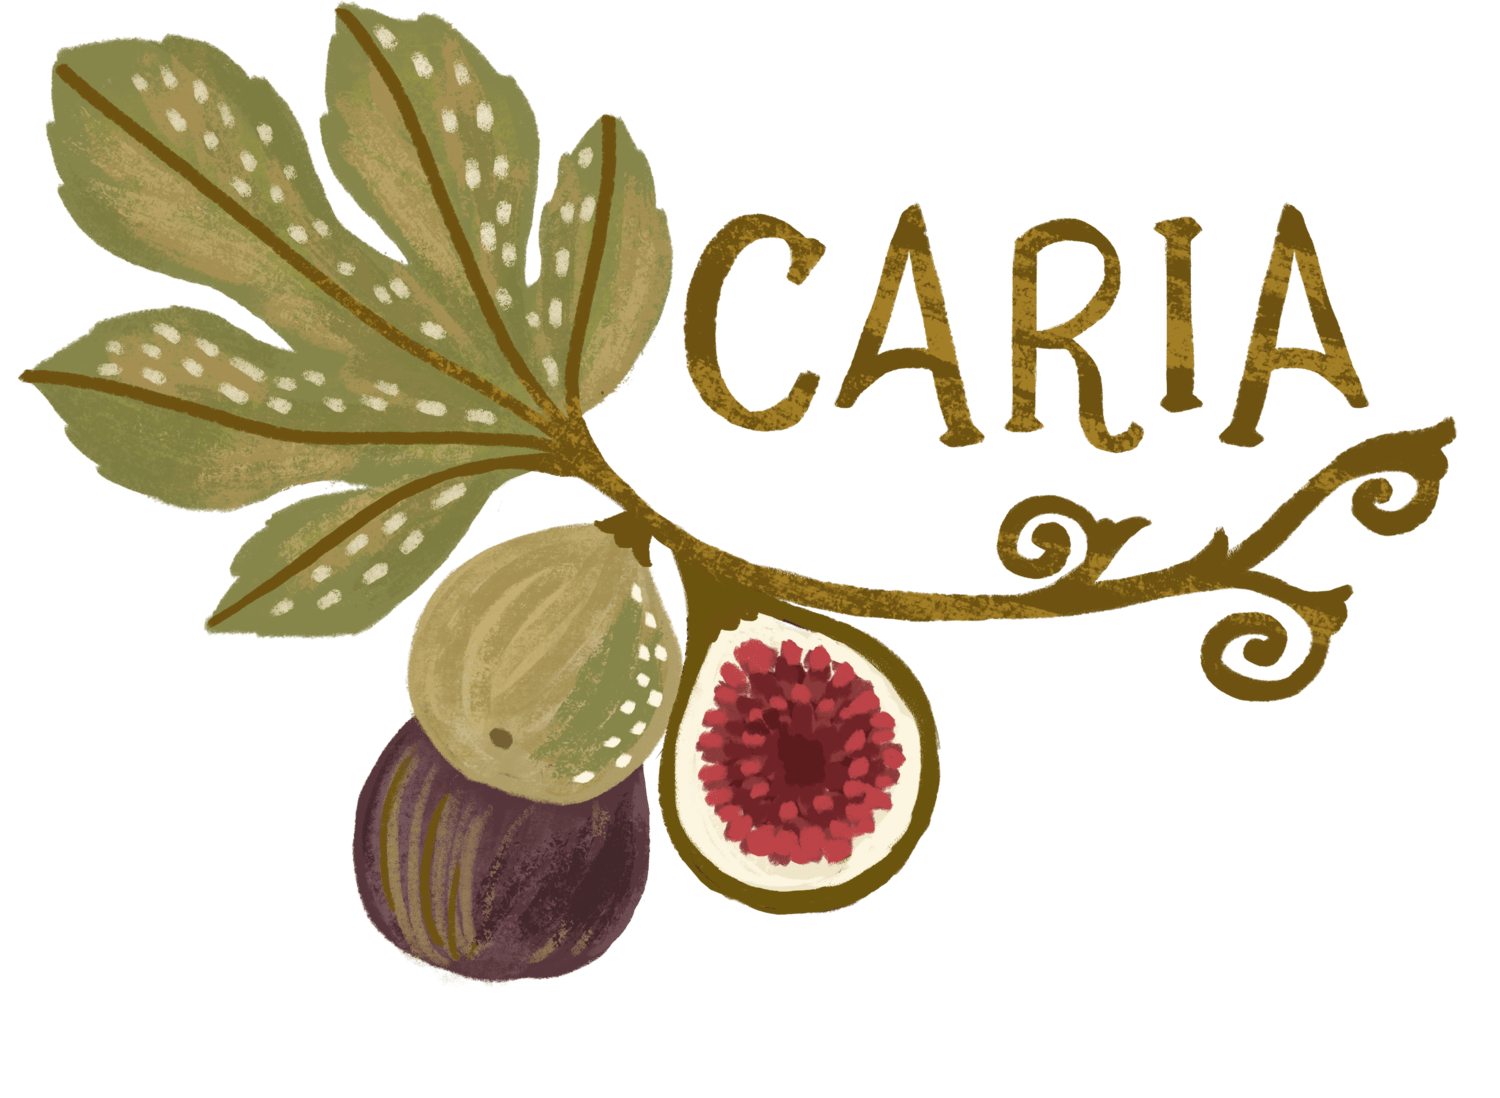 10% Off With Fig of Caria Coupon Code